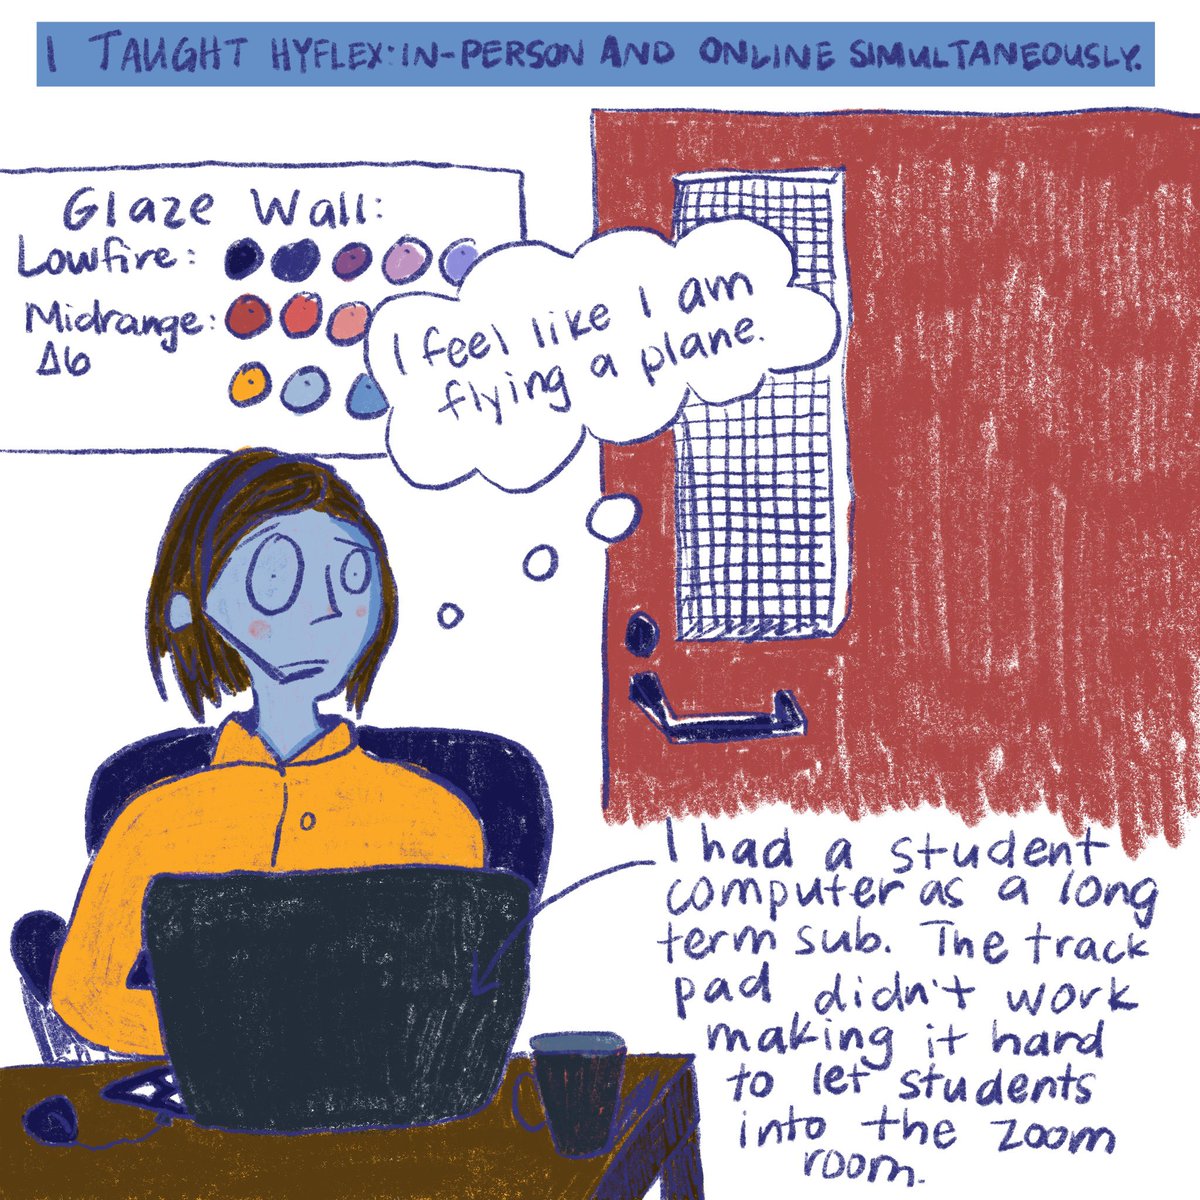 I made a comic about losing my job as a public school teacher in Washington due to budget cuts. The answer imo is reforming how we fund public schools, not easily done, but essential. This is my opinion, not that of my former employer. #waleg #schoolfunding #mccleary #budgetcuts